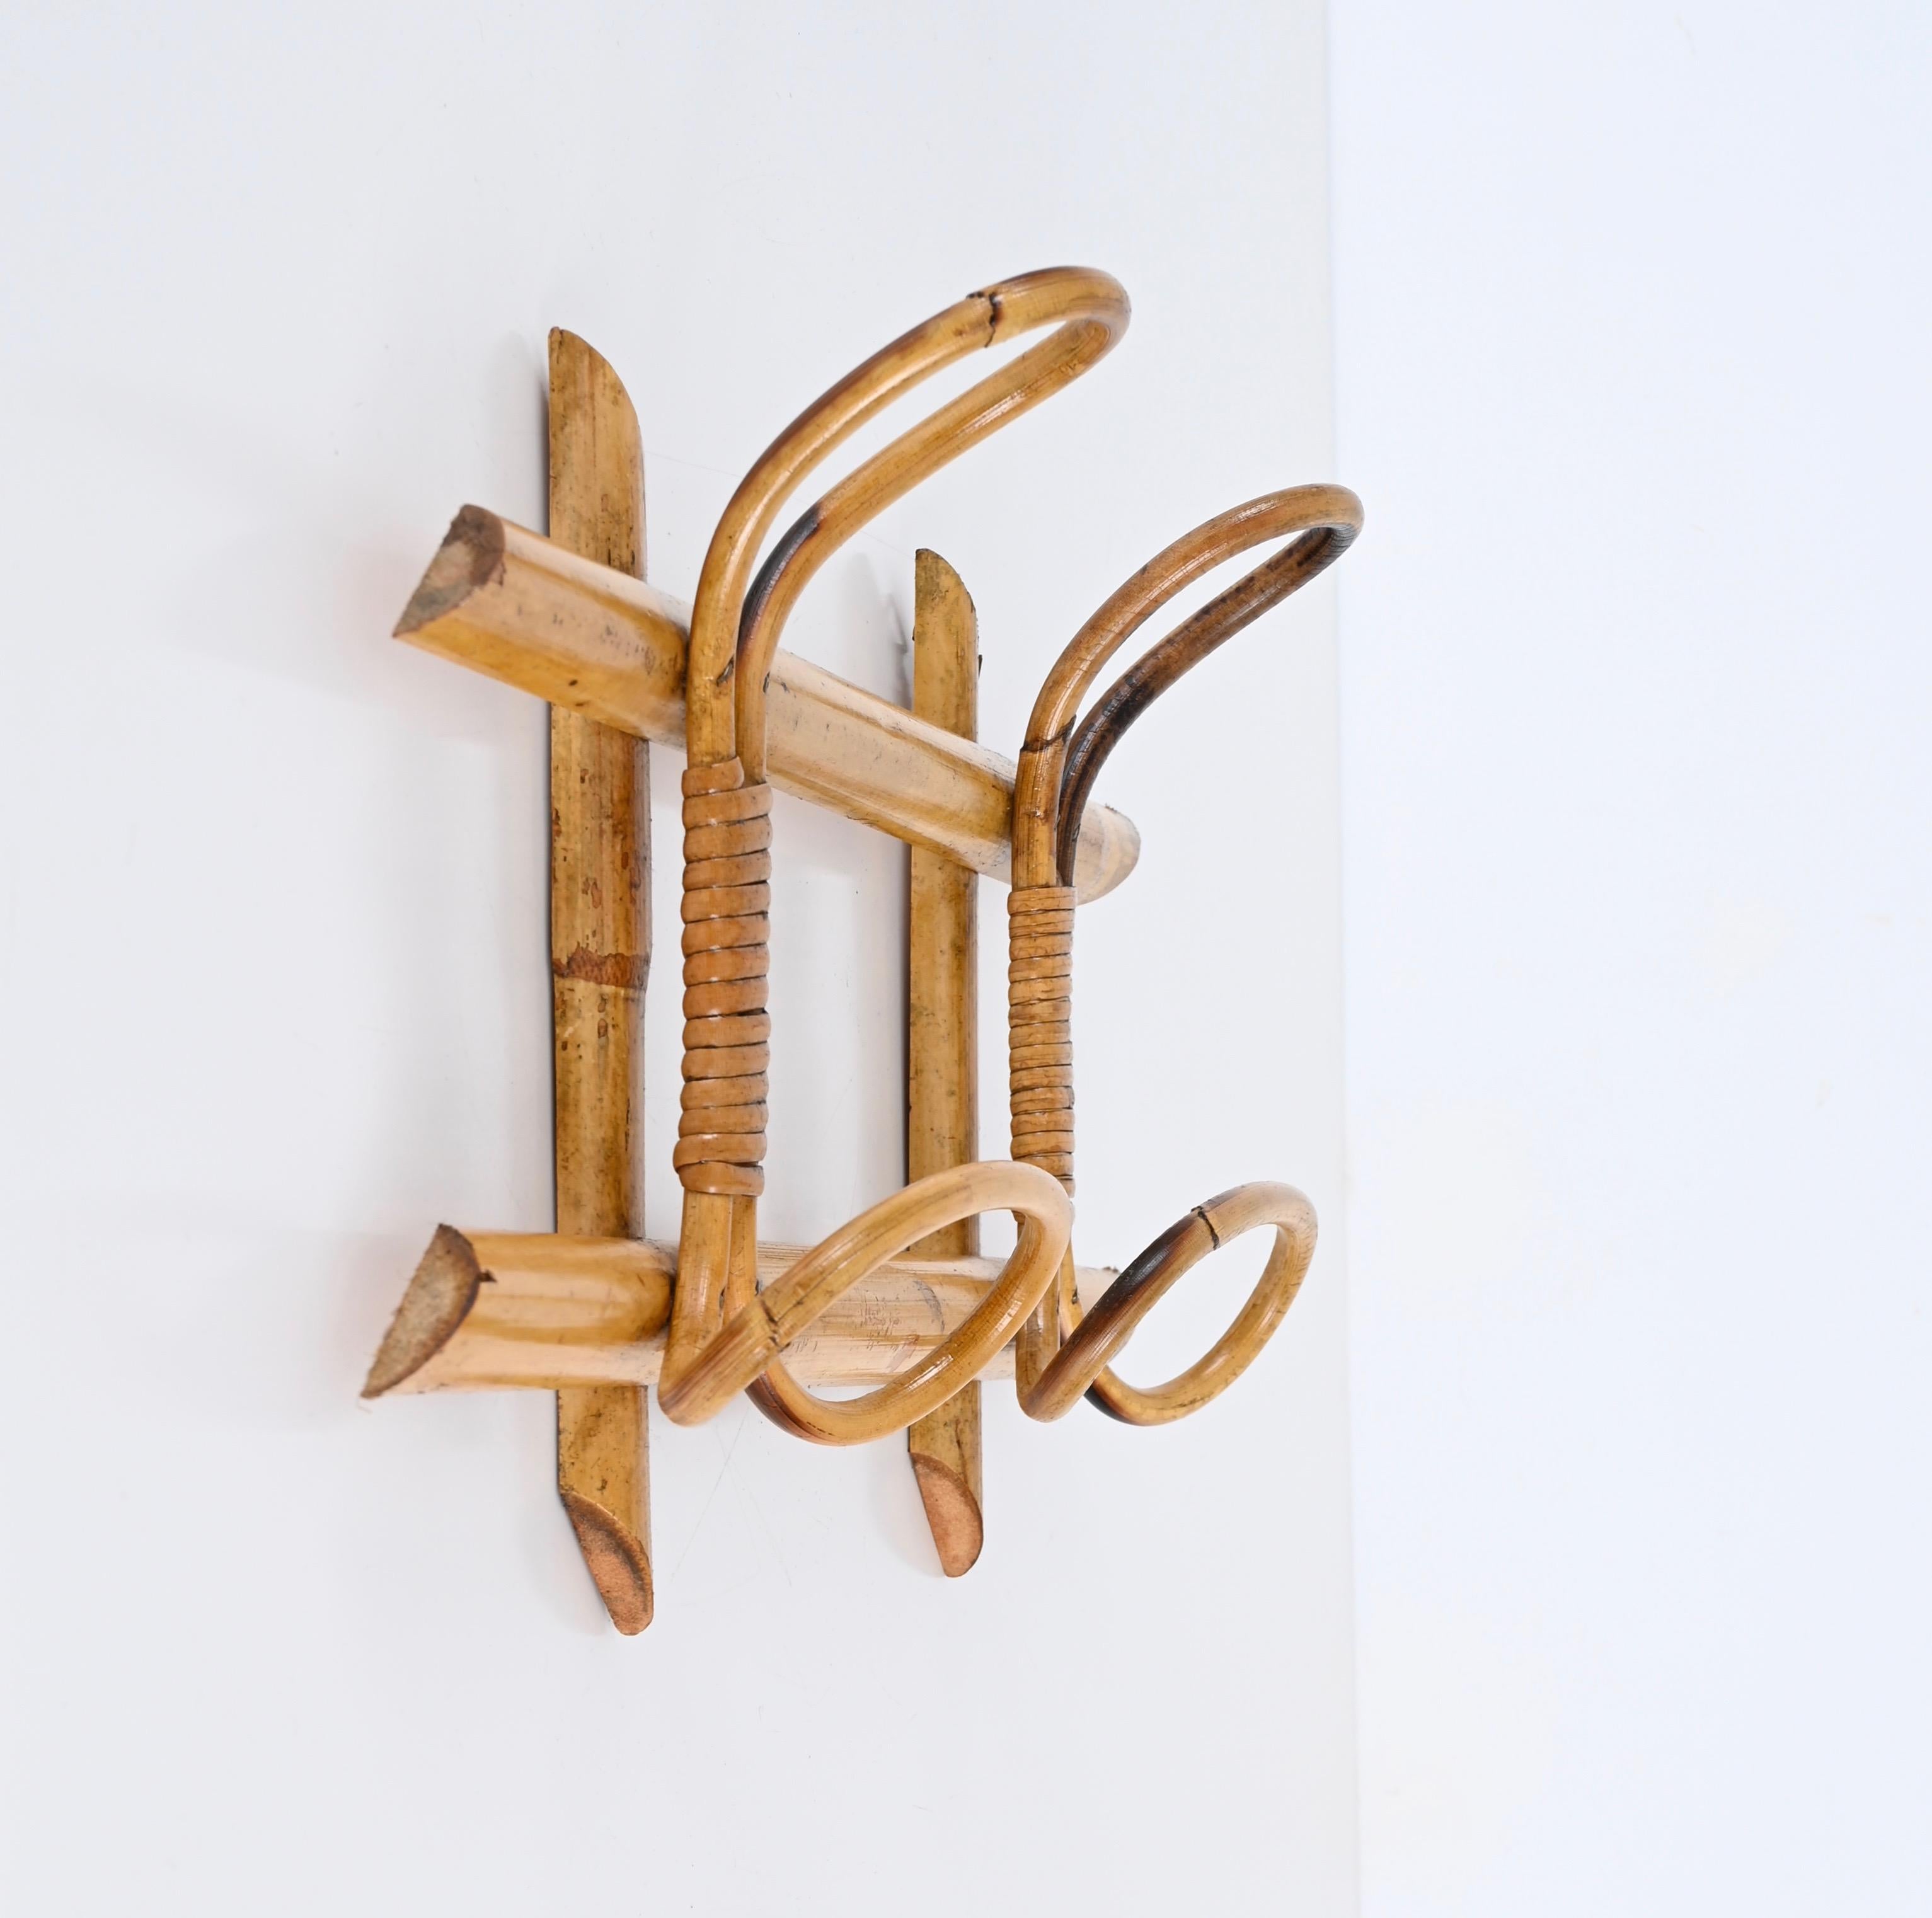 Midcentury French Riviera Coat Rack in Rattan, Wicker and Bamboo, Italy 1960s For Sale 1